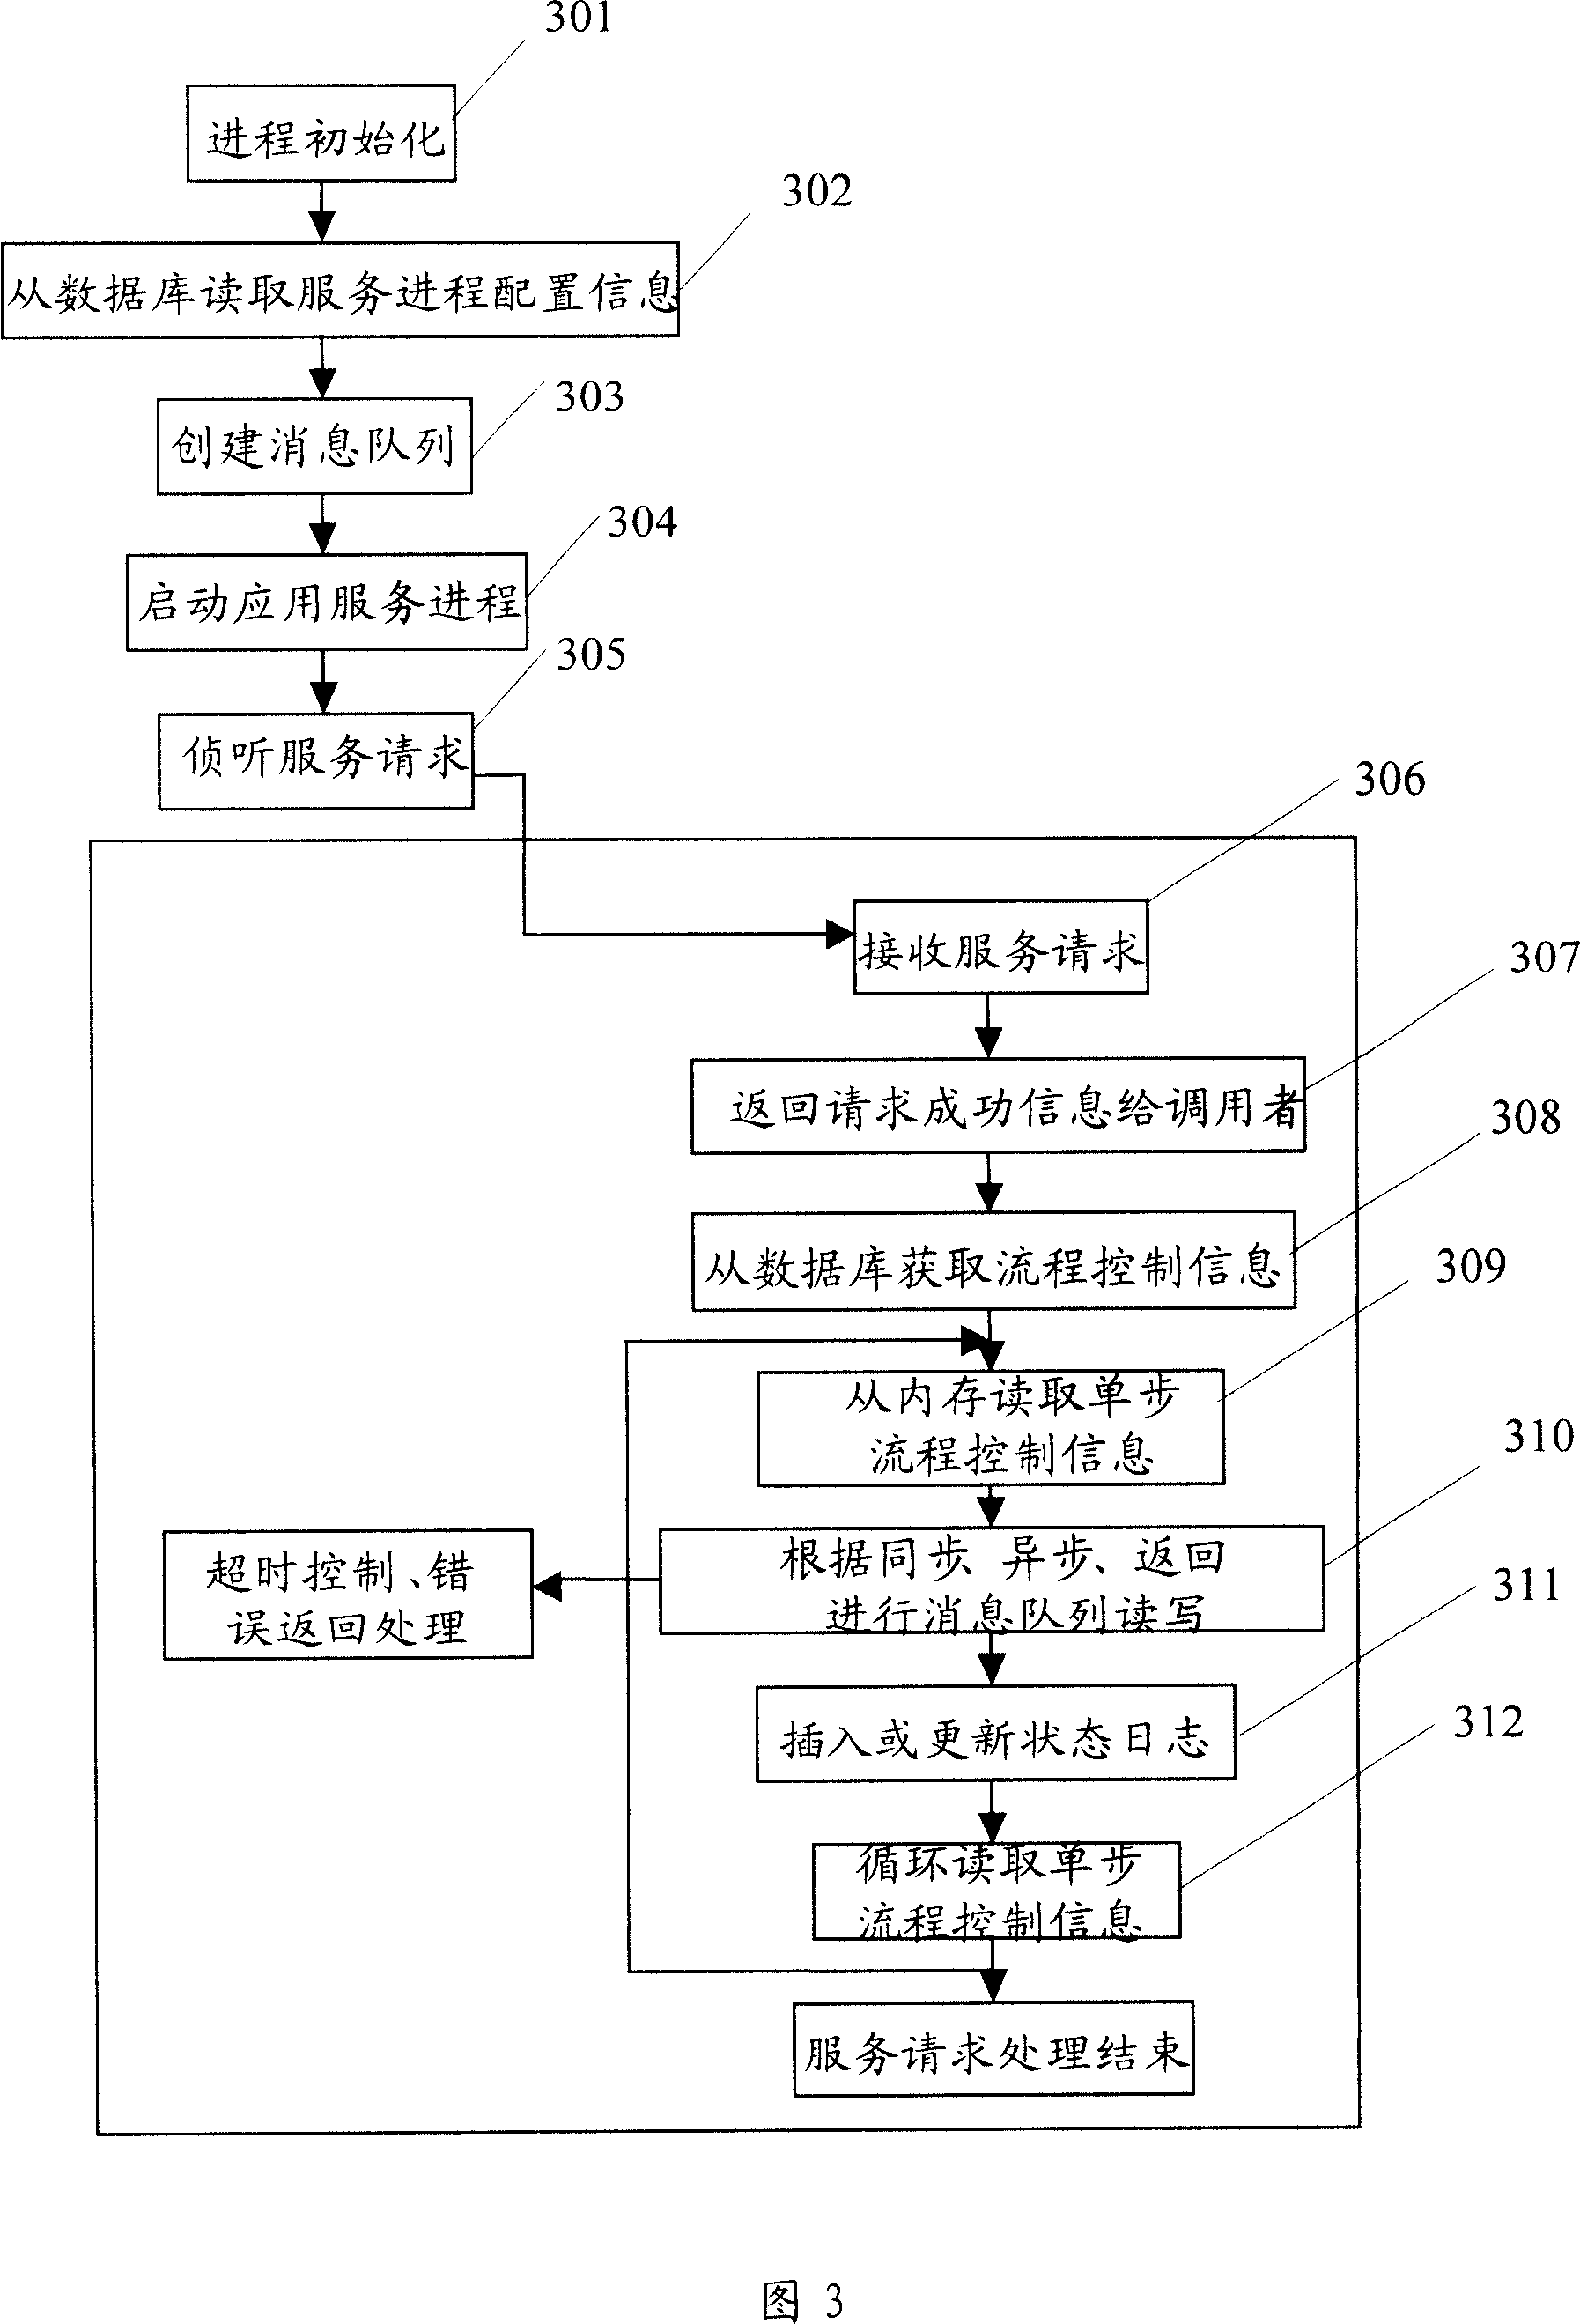 Flowpath scheduling method and system of application progress